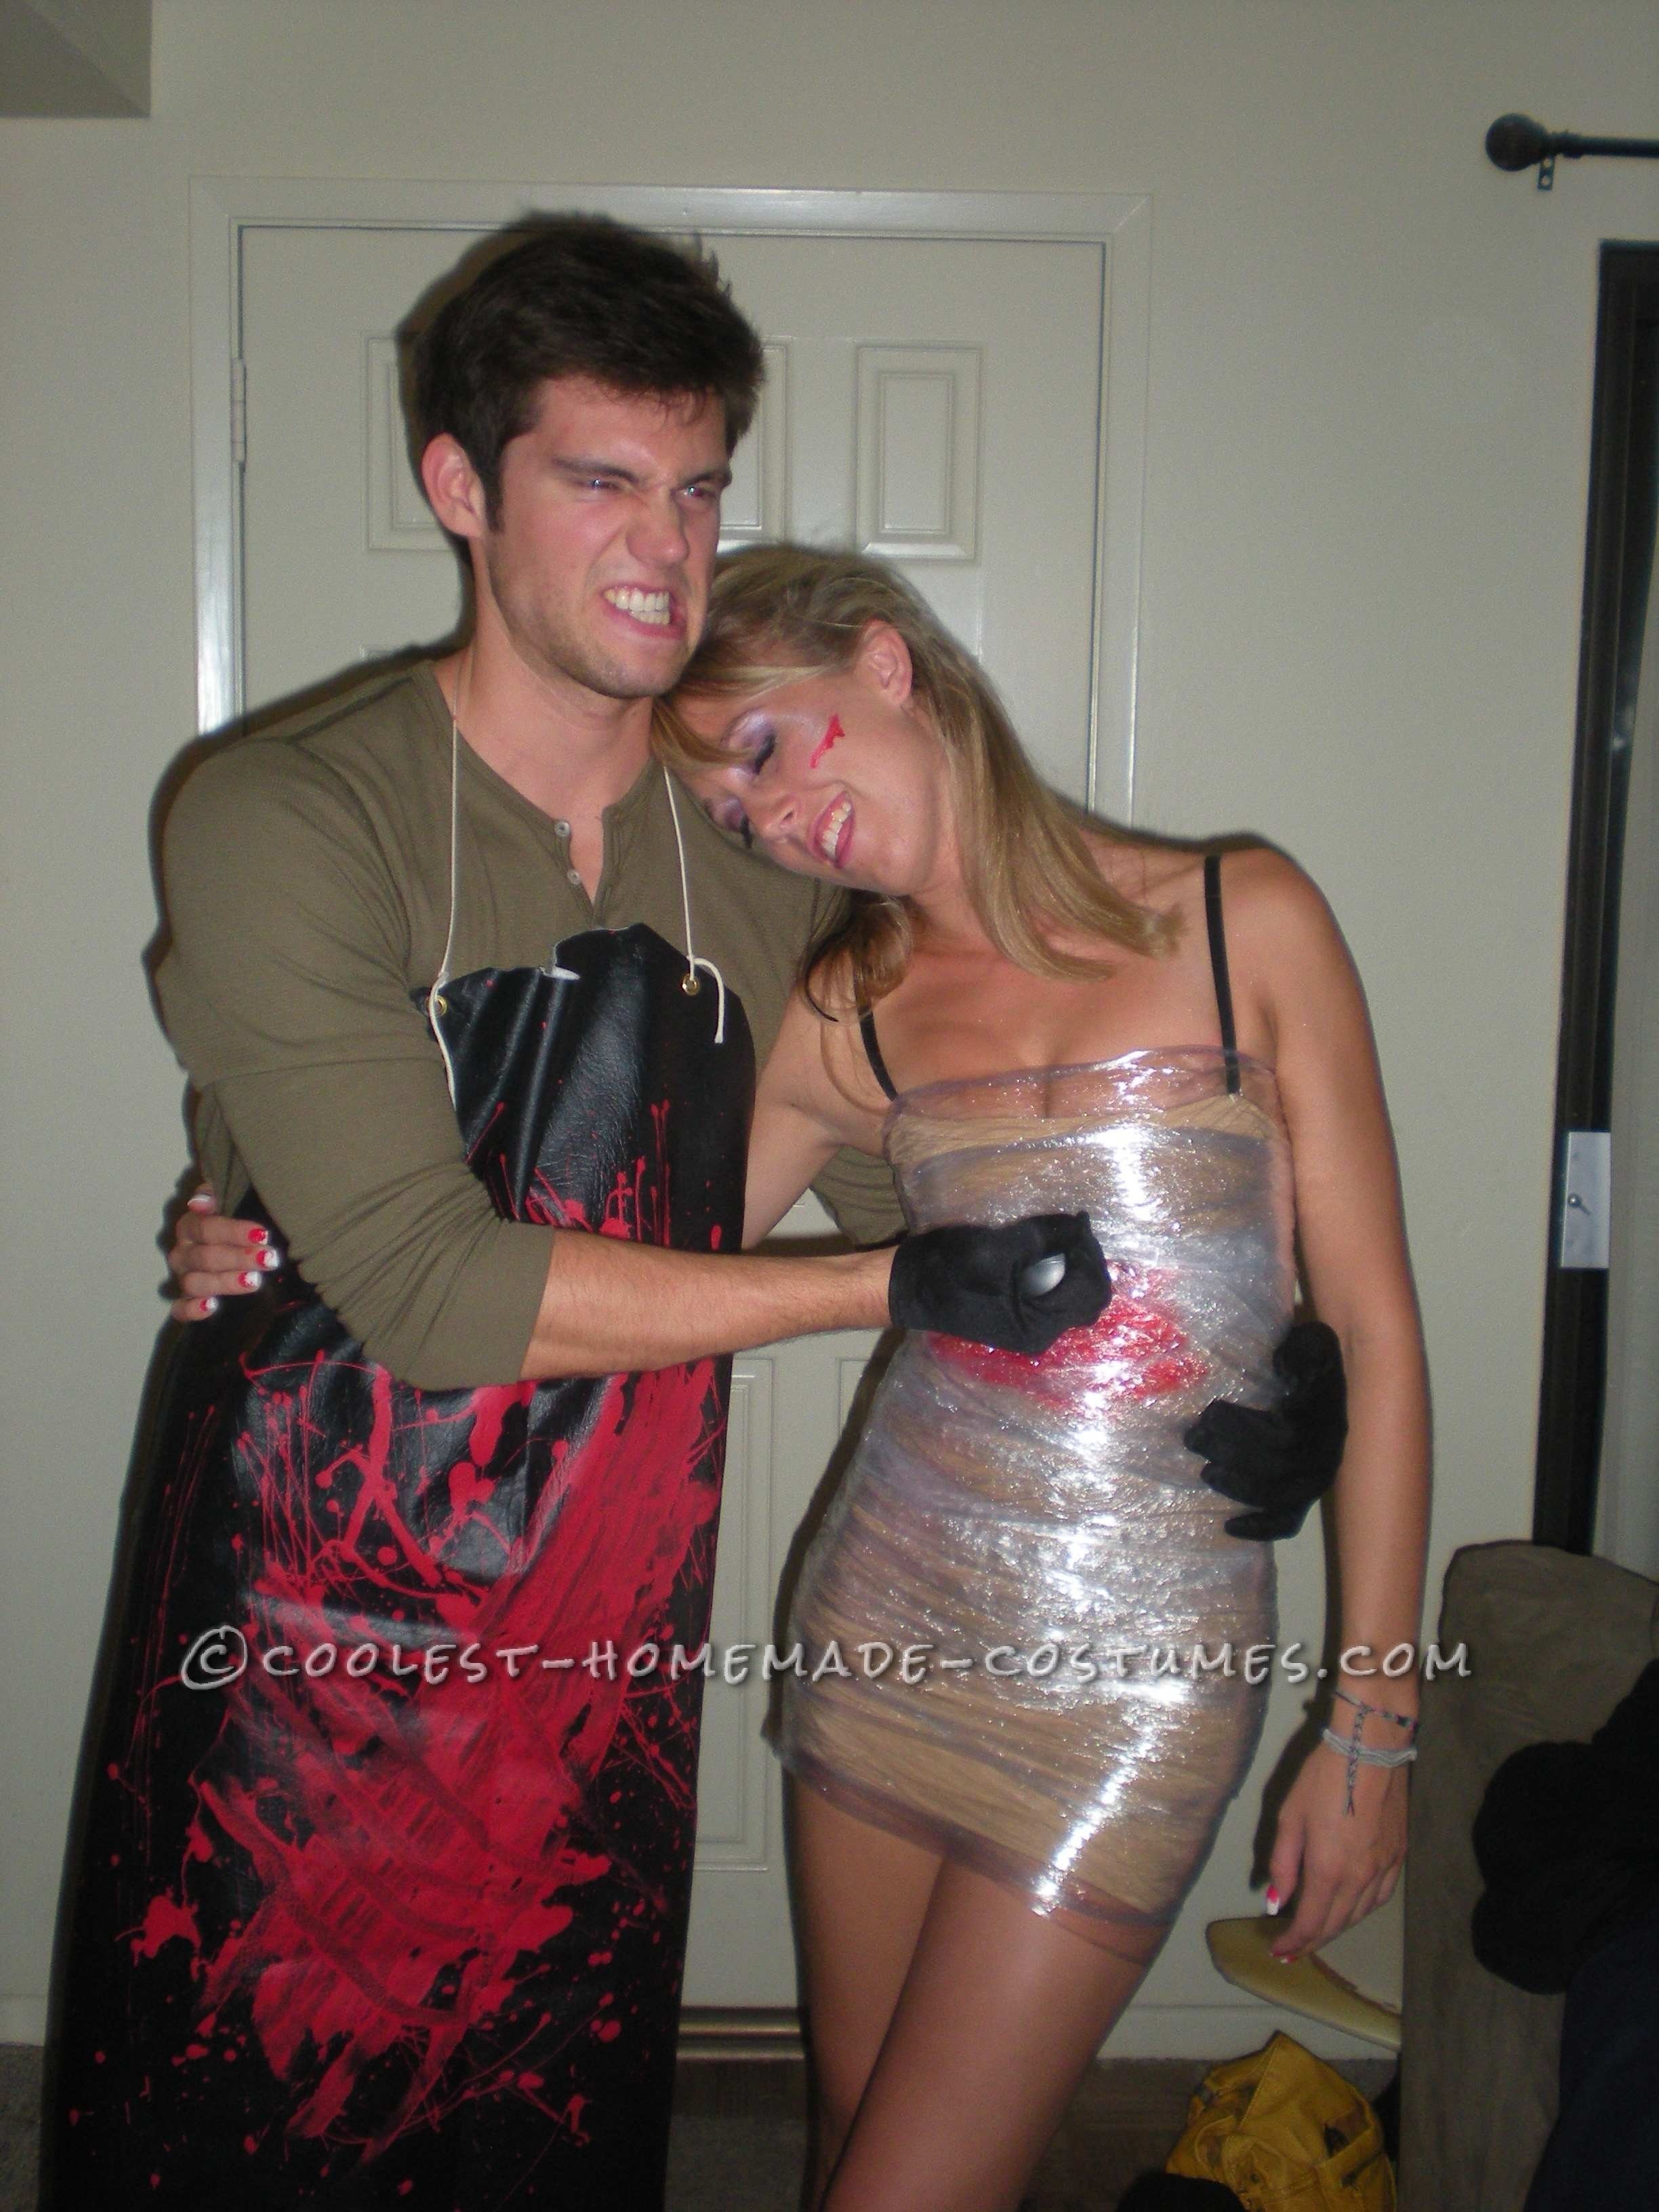 10 Most Recommended Homemade Halloween Costume Ideas For Couples cheap and easy to make dexter couple costume 4 2022